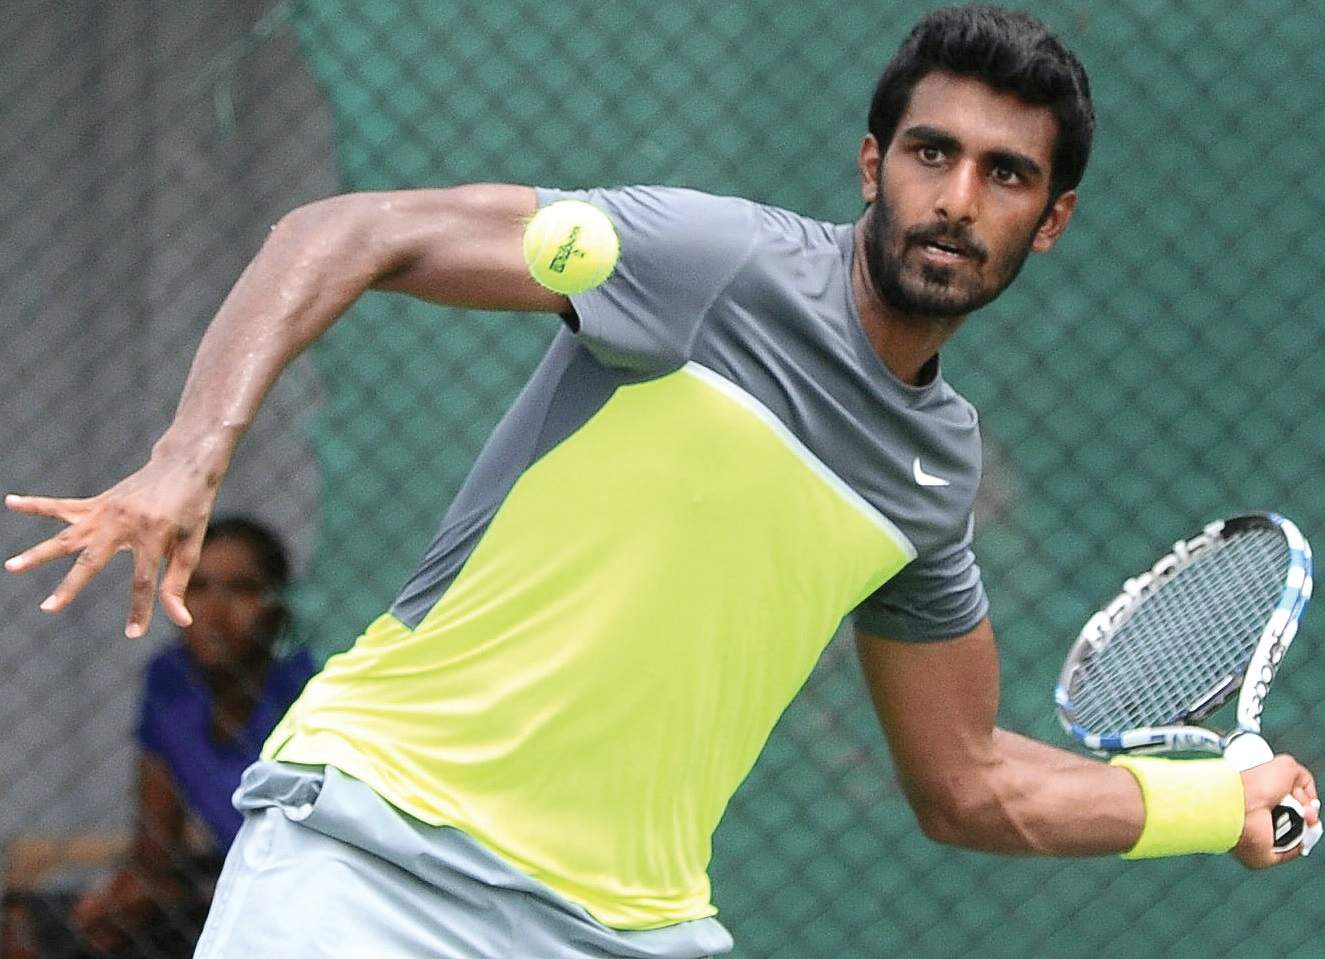 Prajnesh Gunneswaran insists quality coaching, training and competition are key to produce future tennis champions